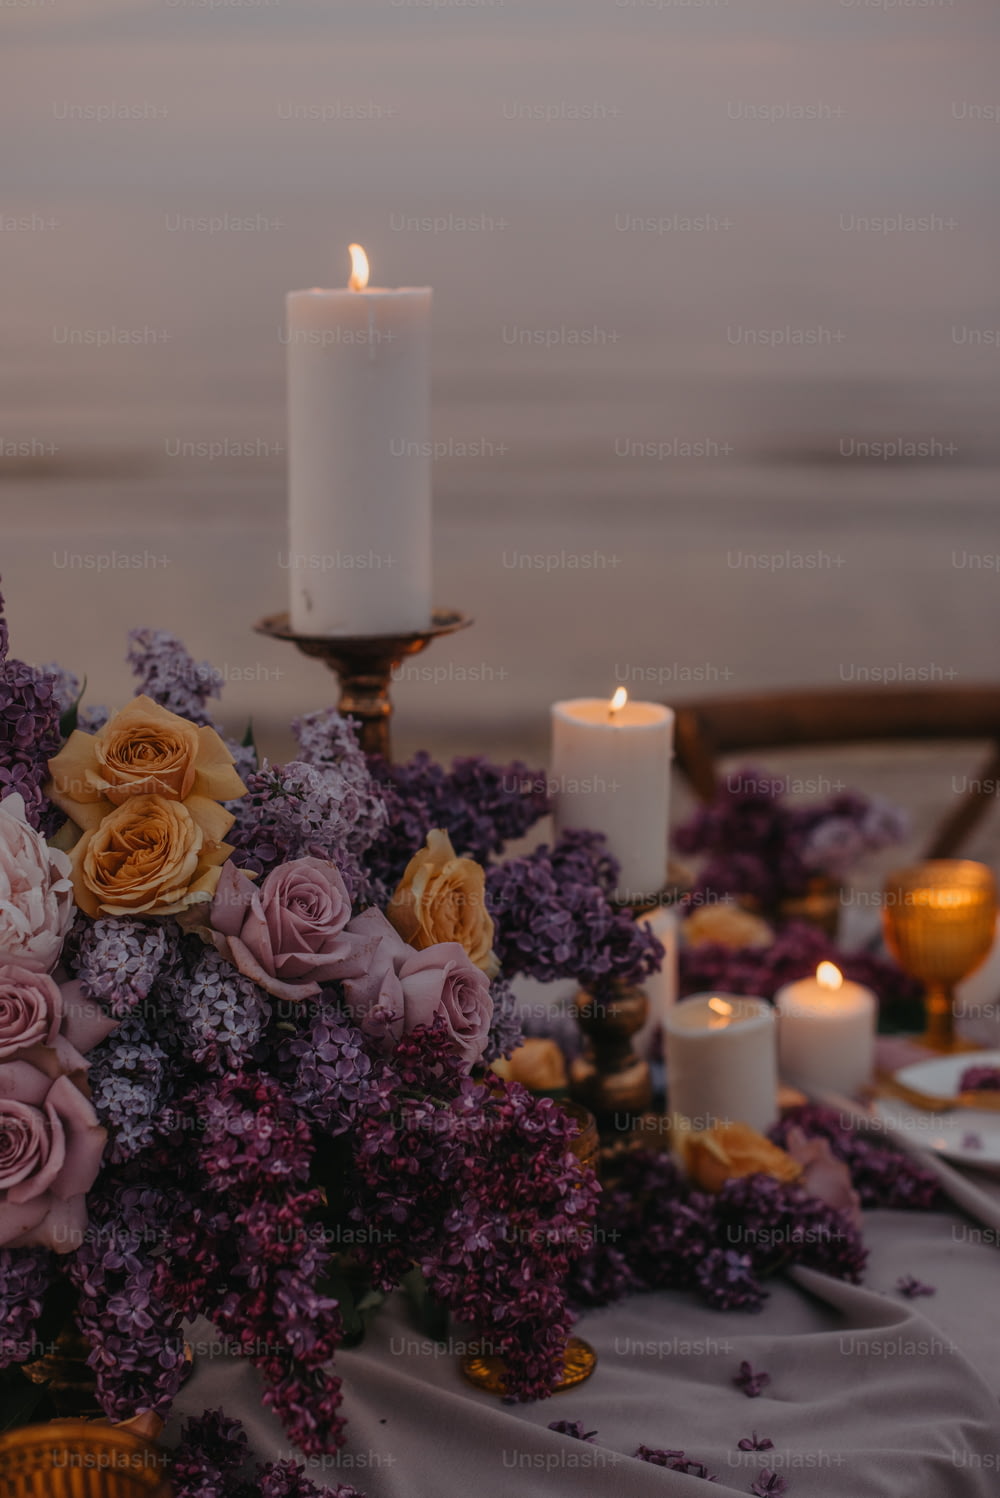 a table topped with a vase filled with flowers and candles